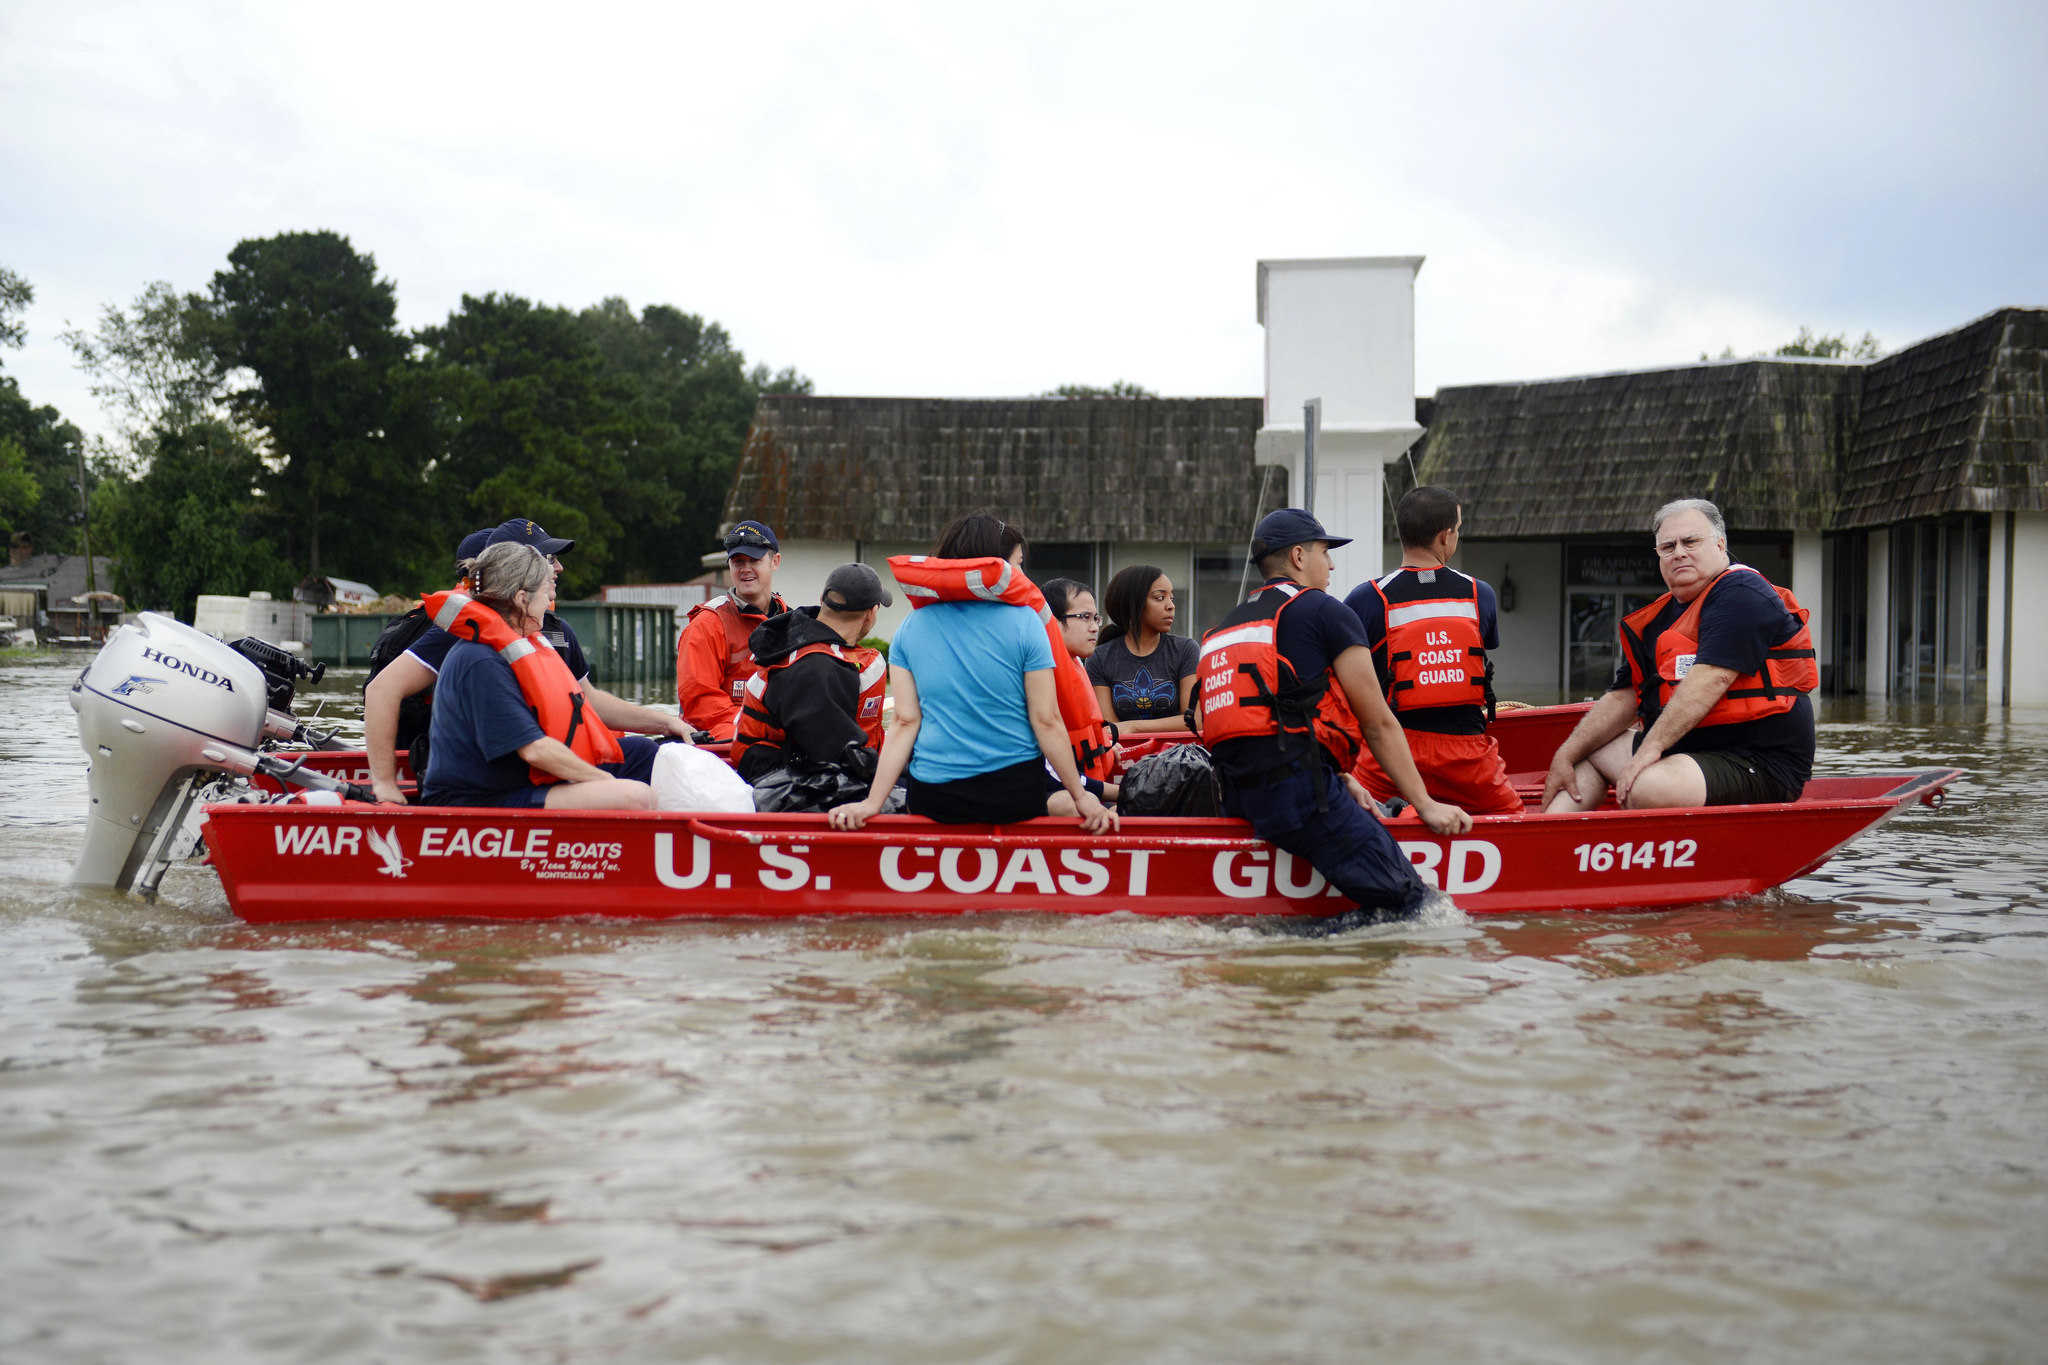 Coast Guardsmen rescue stranded residents from high water during severe flooding around Baton Rouge, Louisiana.